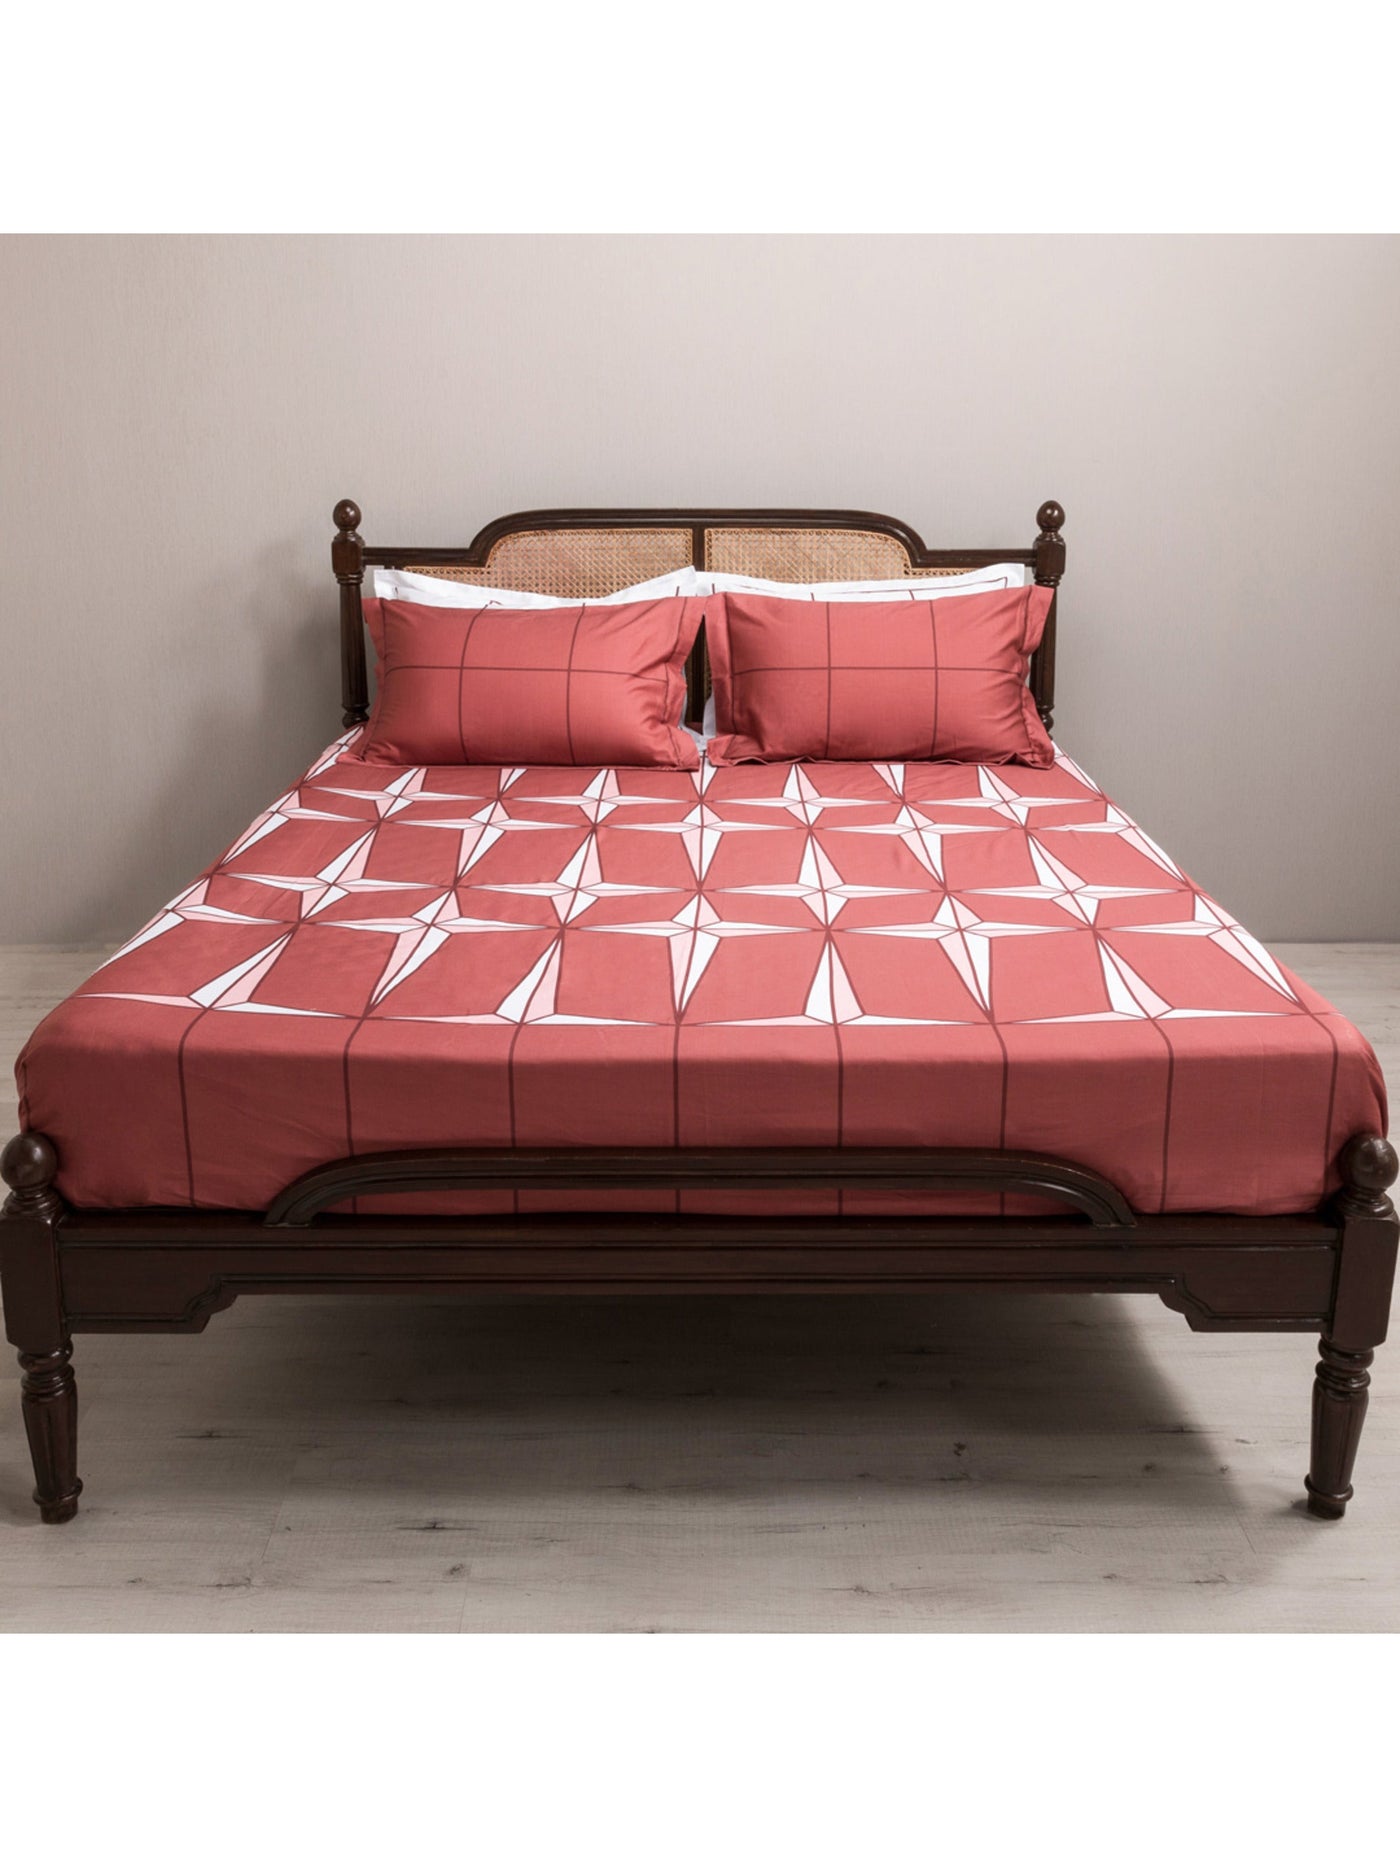 Bedsheet - The Holy Azulejos In Burnt Rust